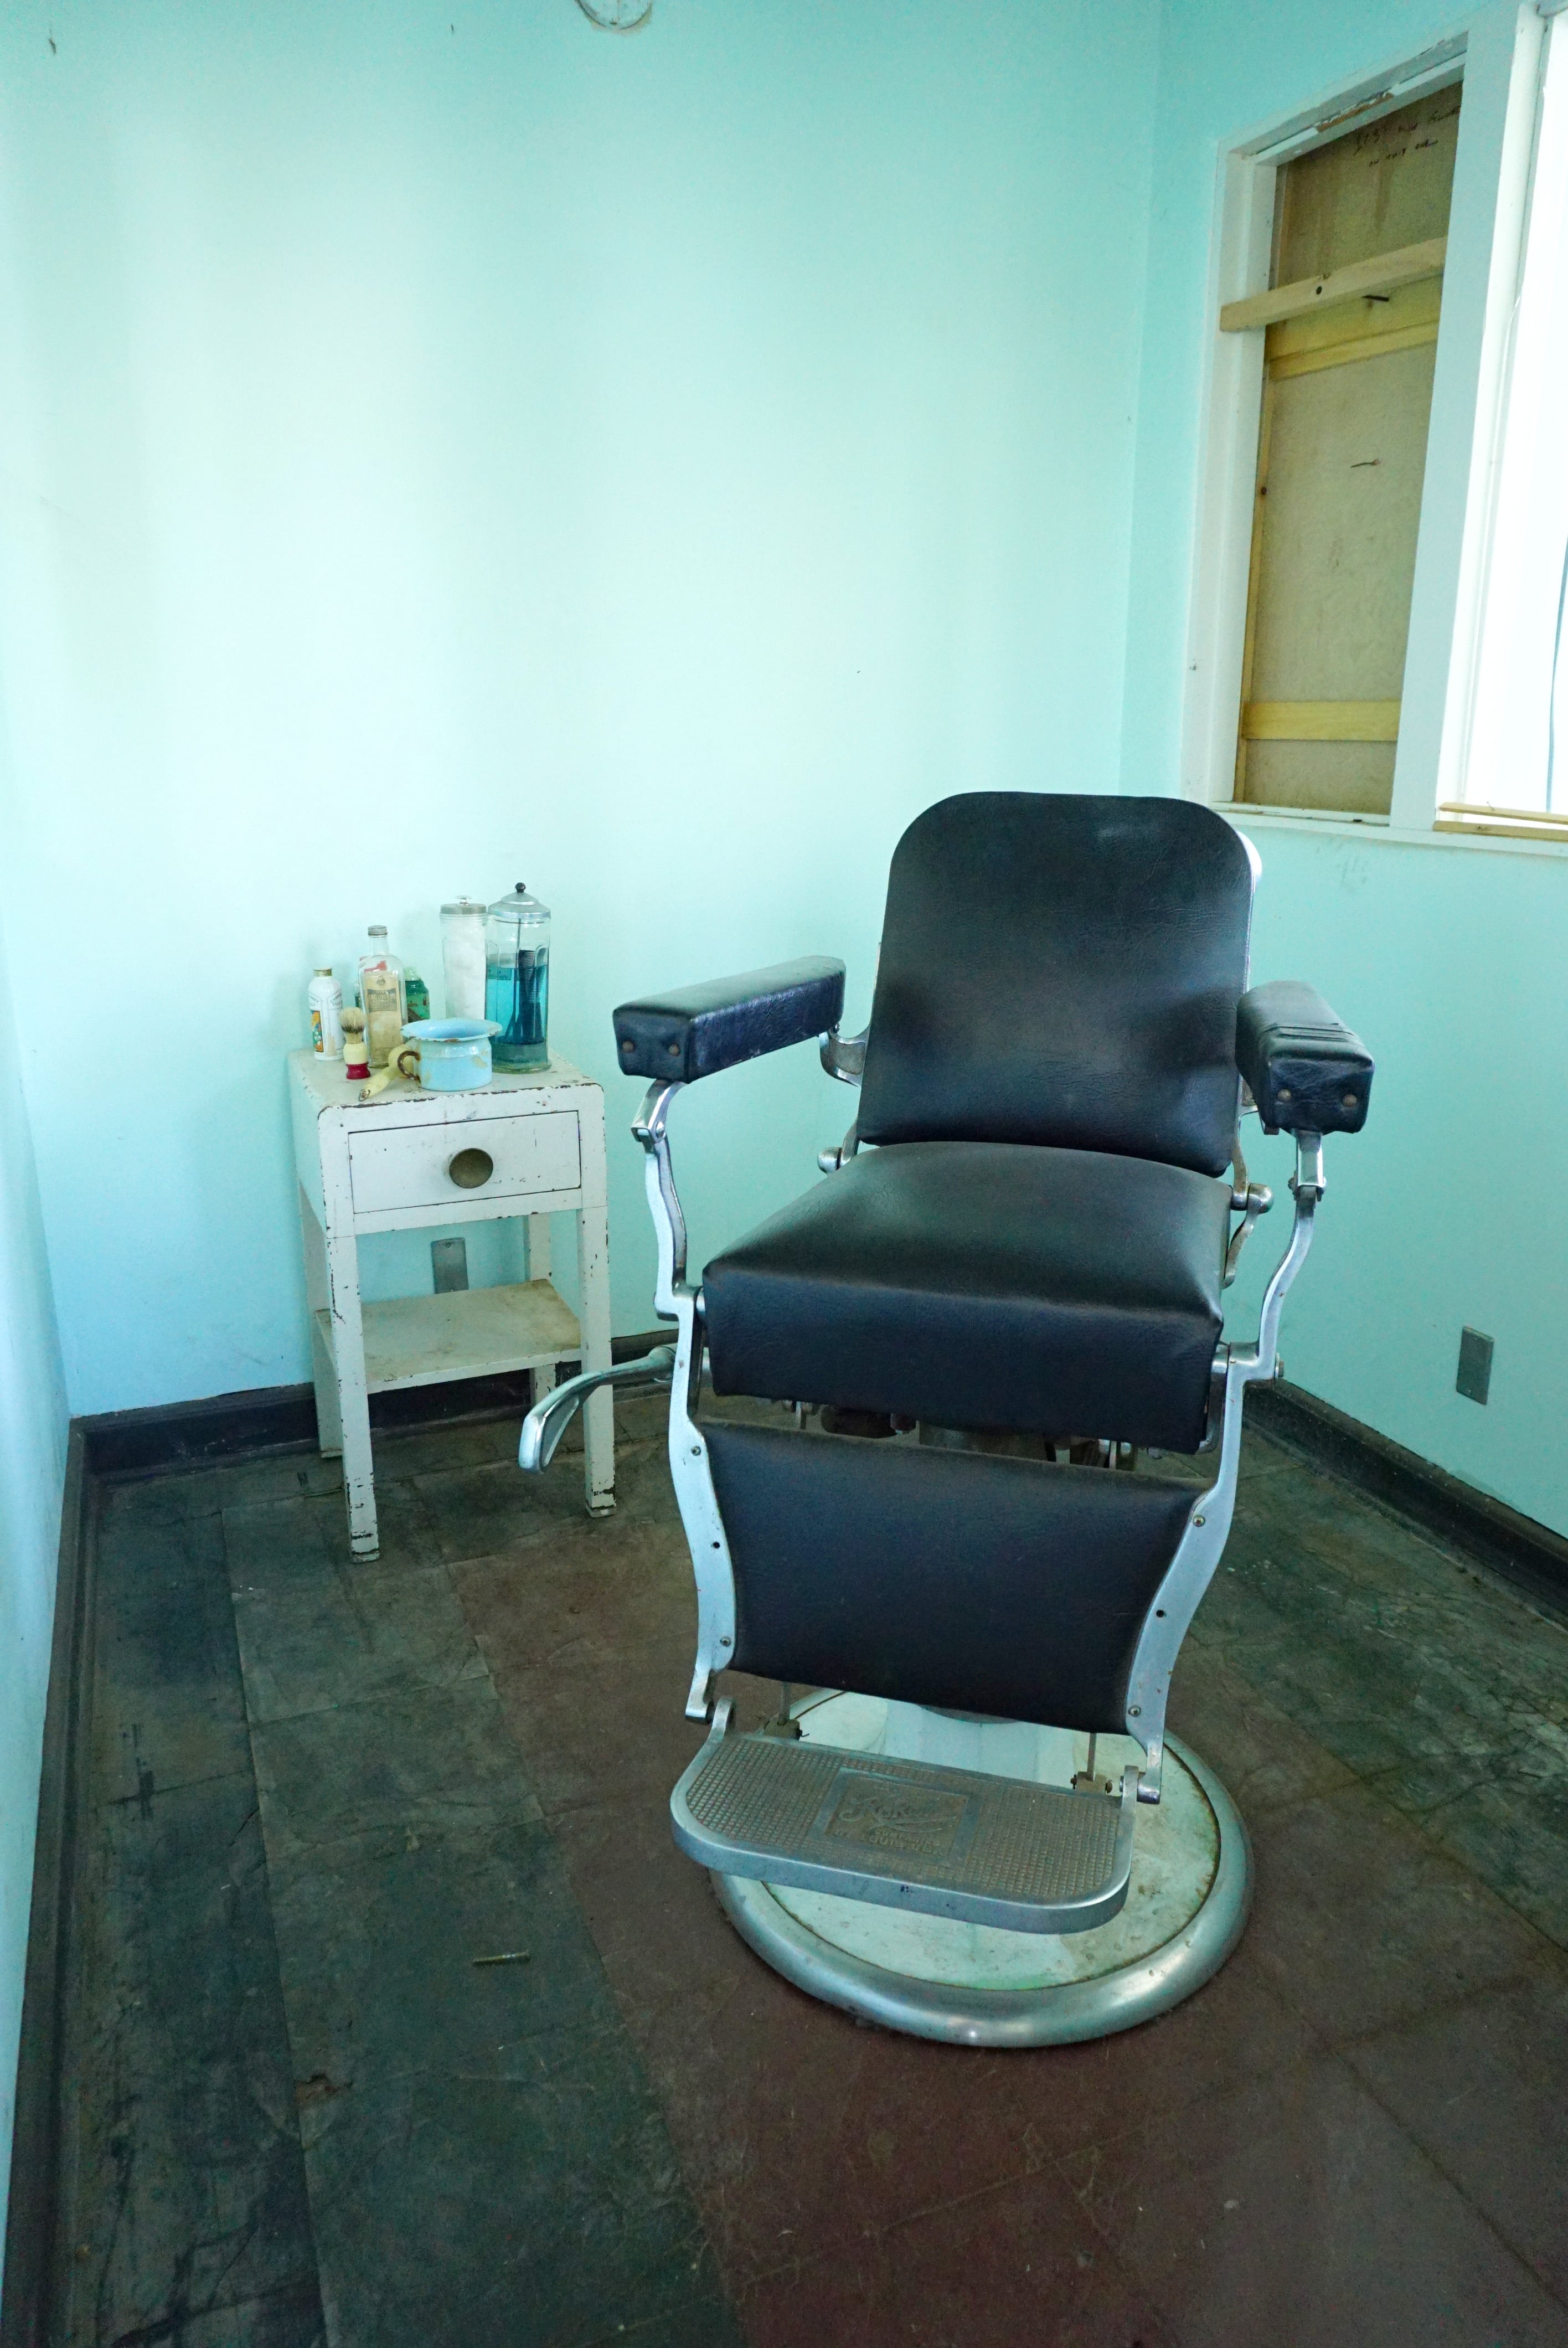 Antique barber chair and shaving supplies in a mint green room